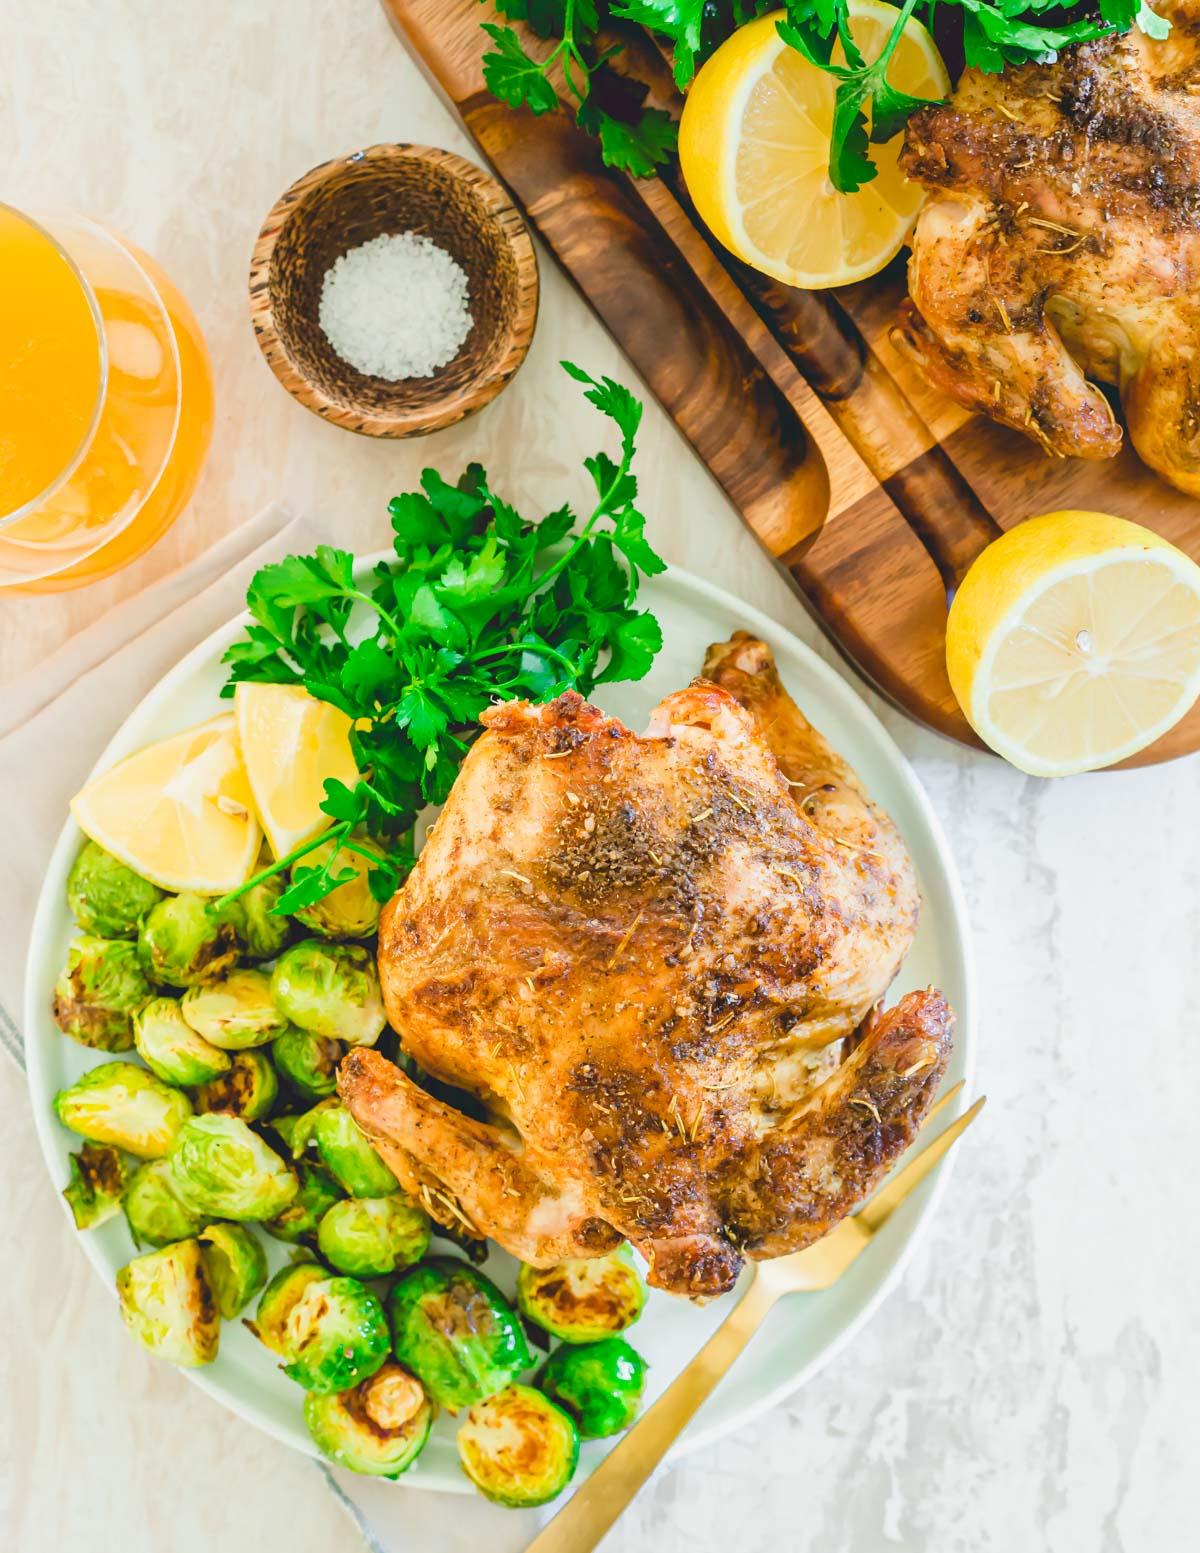 Tender juicy air fryer Cornish game hen cut into pieces on a plate with roasted Brussels sprouts.